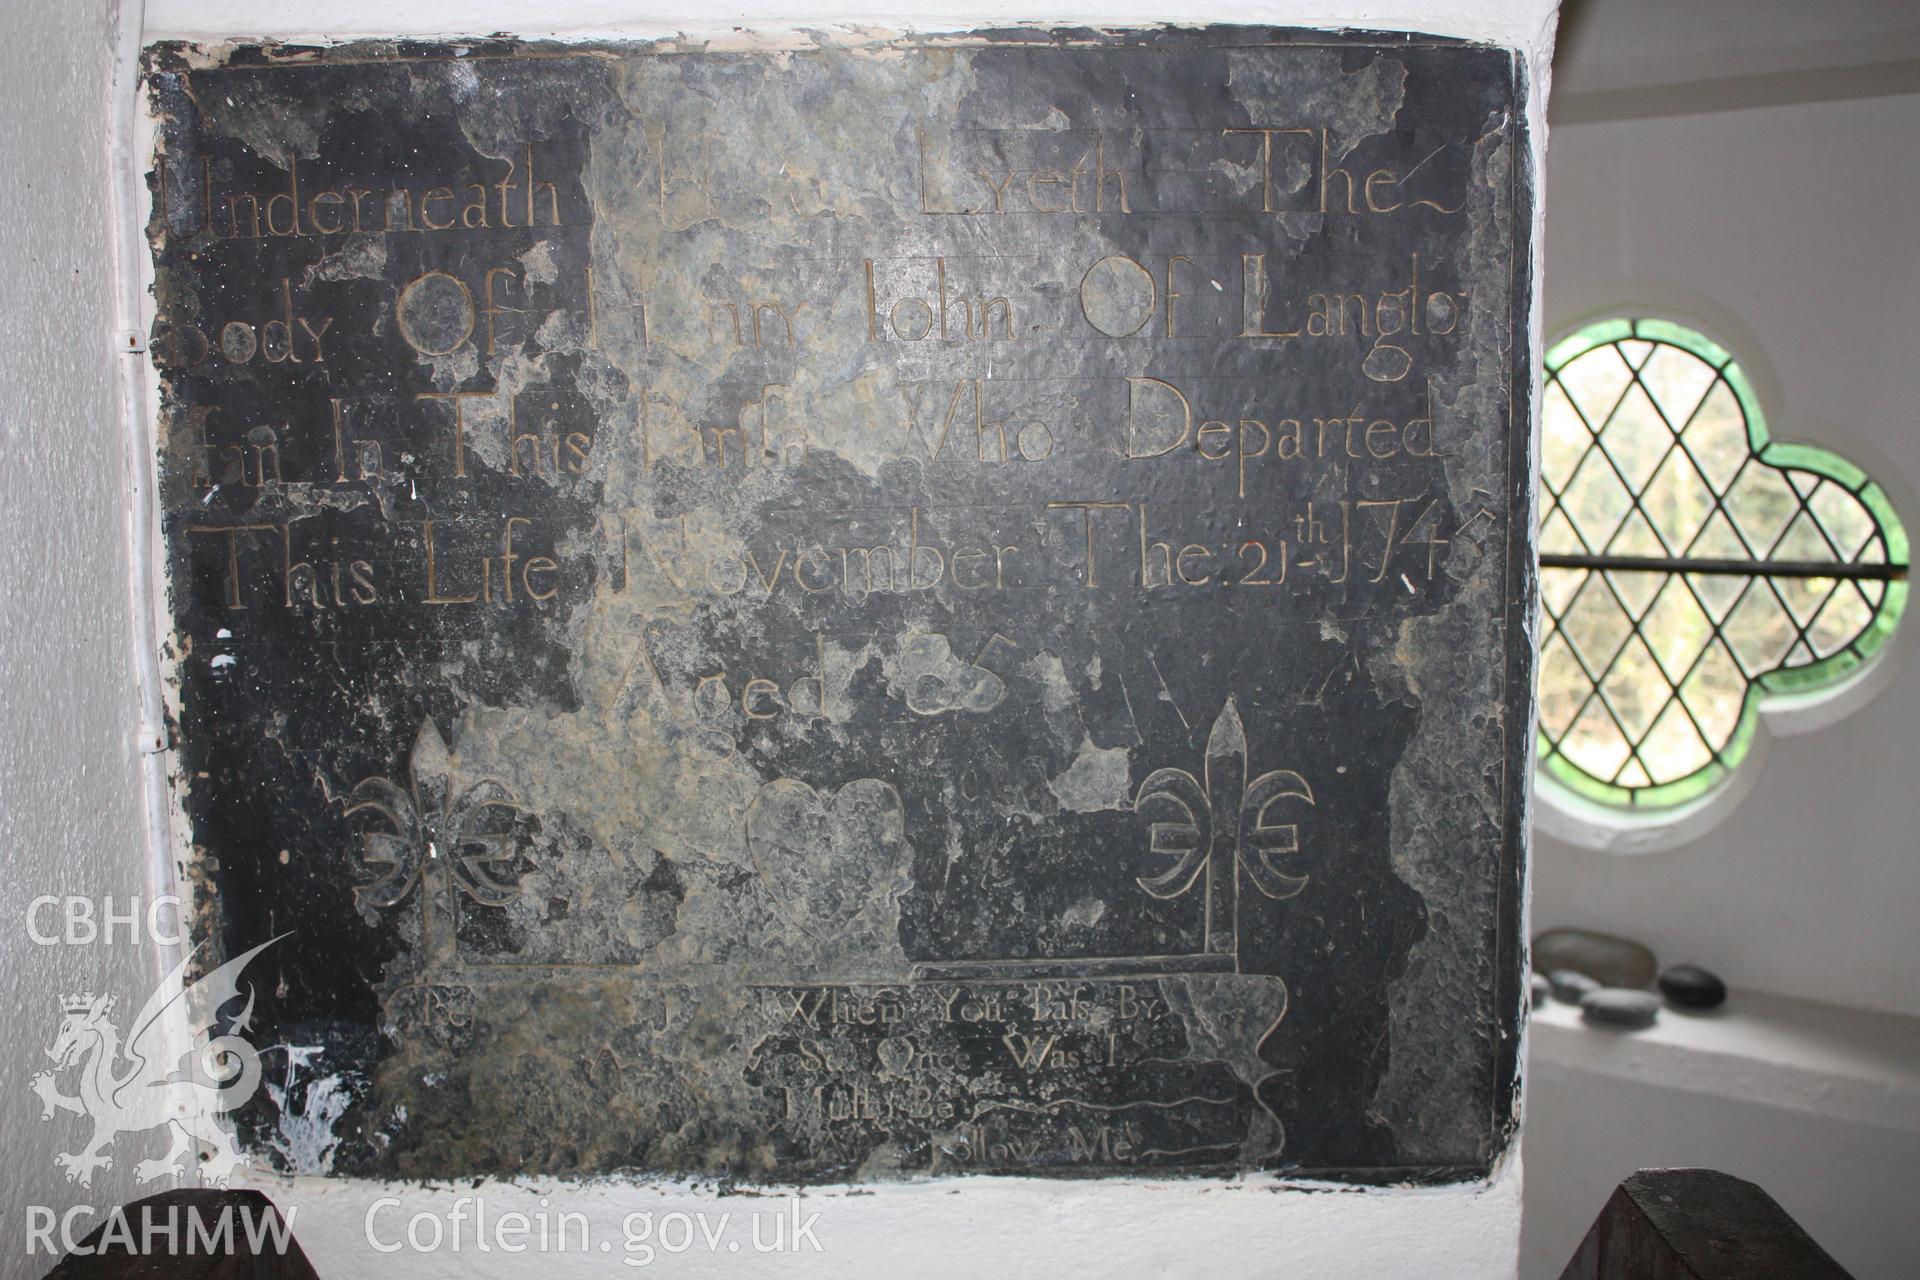 Memorial tablet to John (?) John of Langlos who departed this life on 21 November 1743